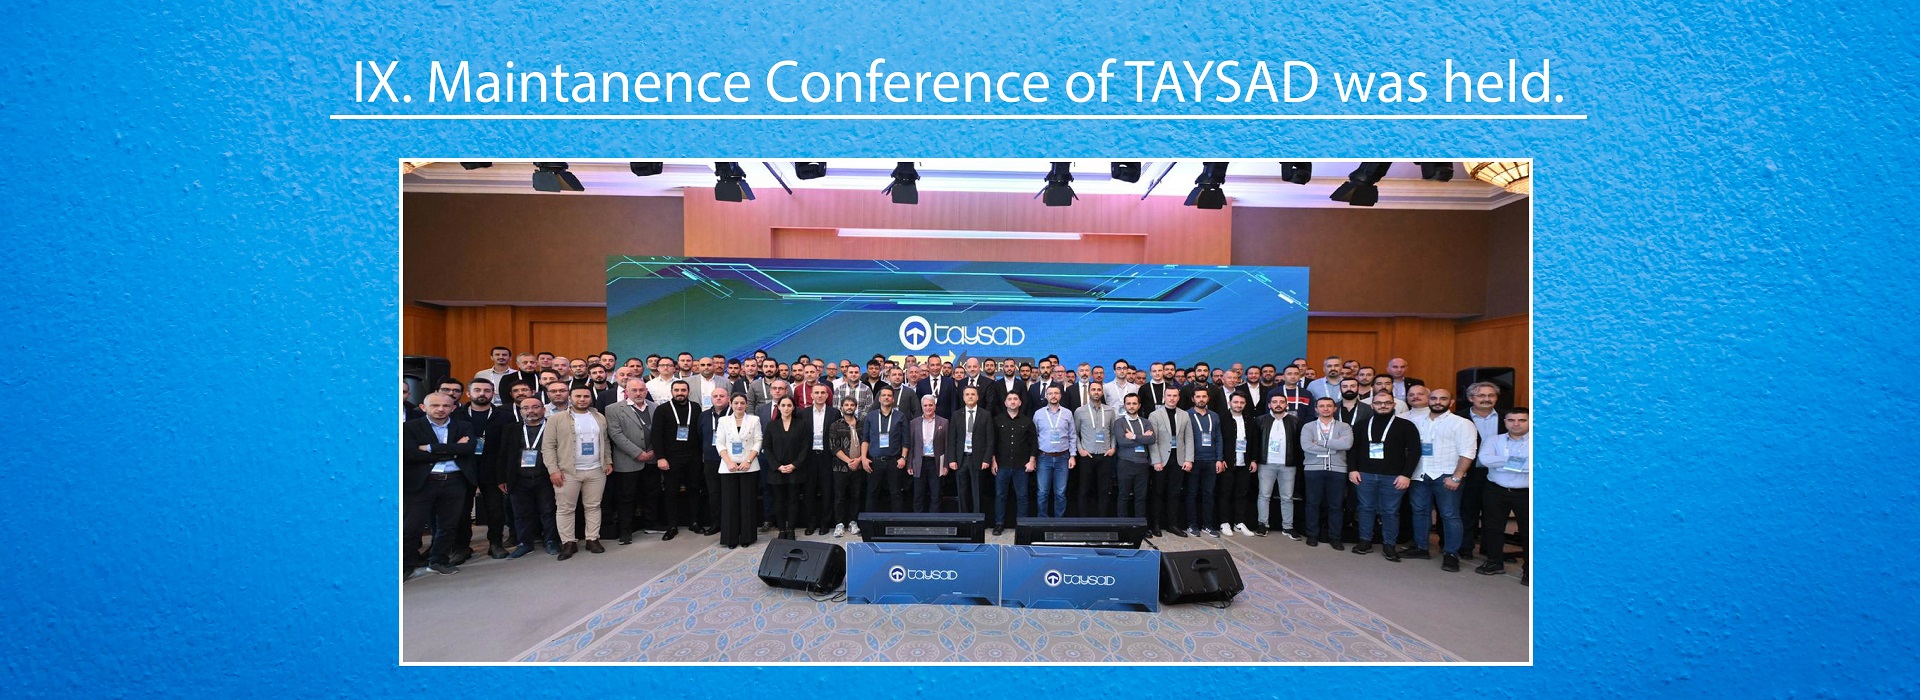 The 9th Maintenance Conference of the TAYSAD was held.